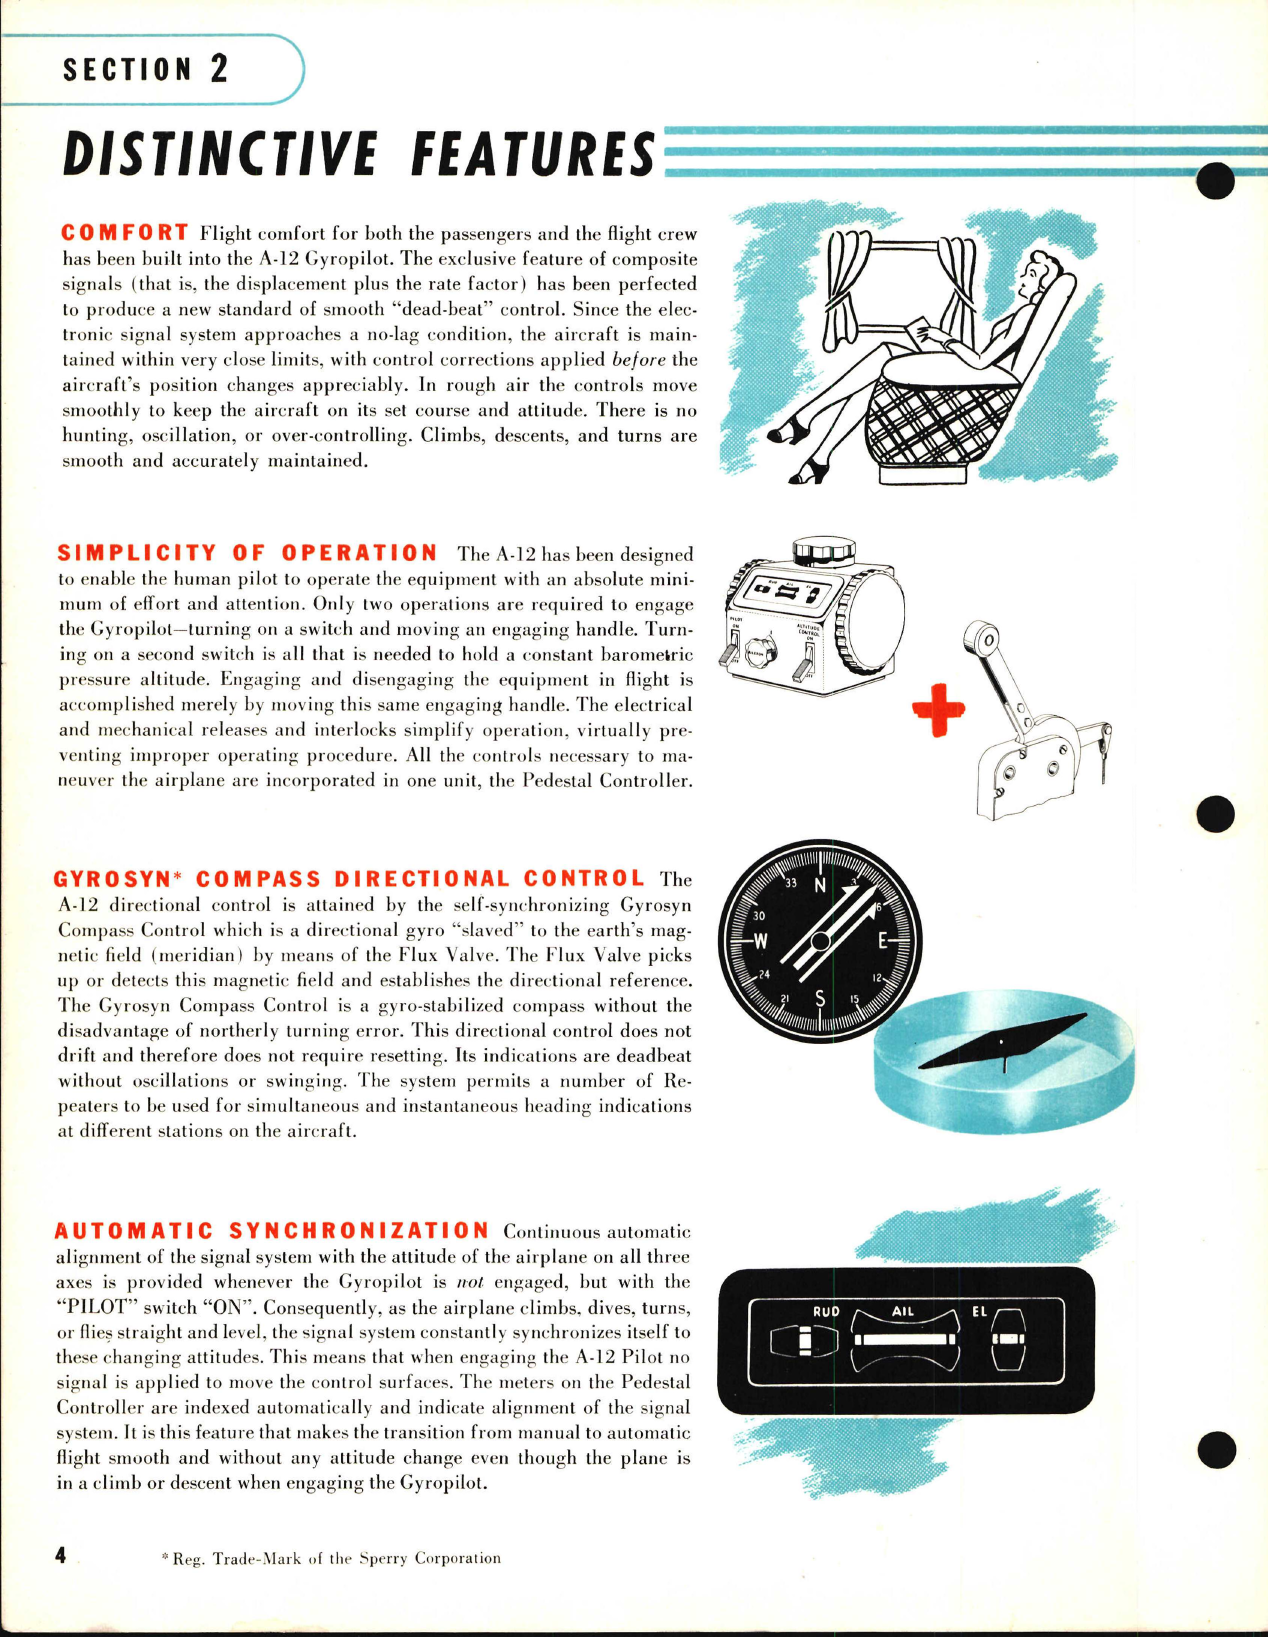 Sample page 6 from AirCorps Library document: Operation and Service for Model A-12 Gyropilot Flight Control